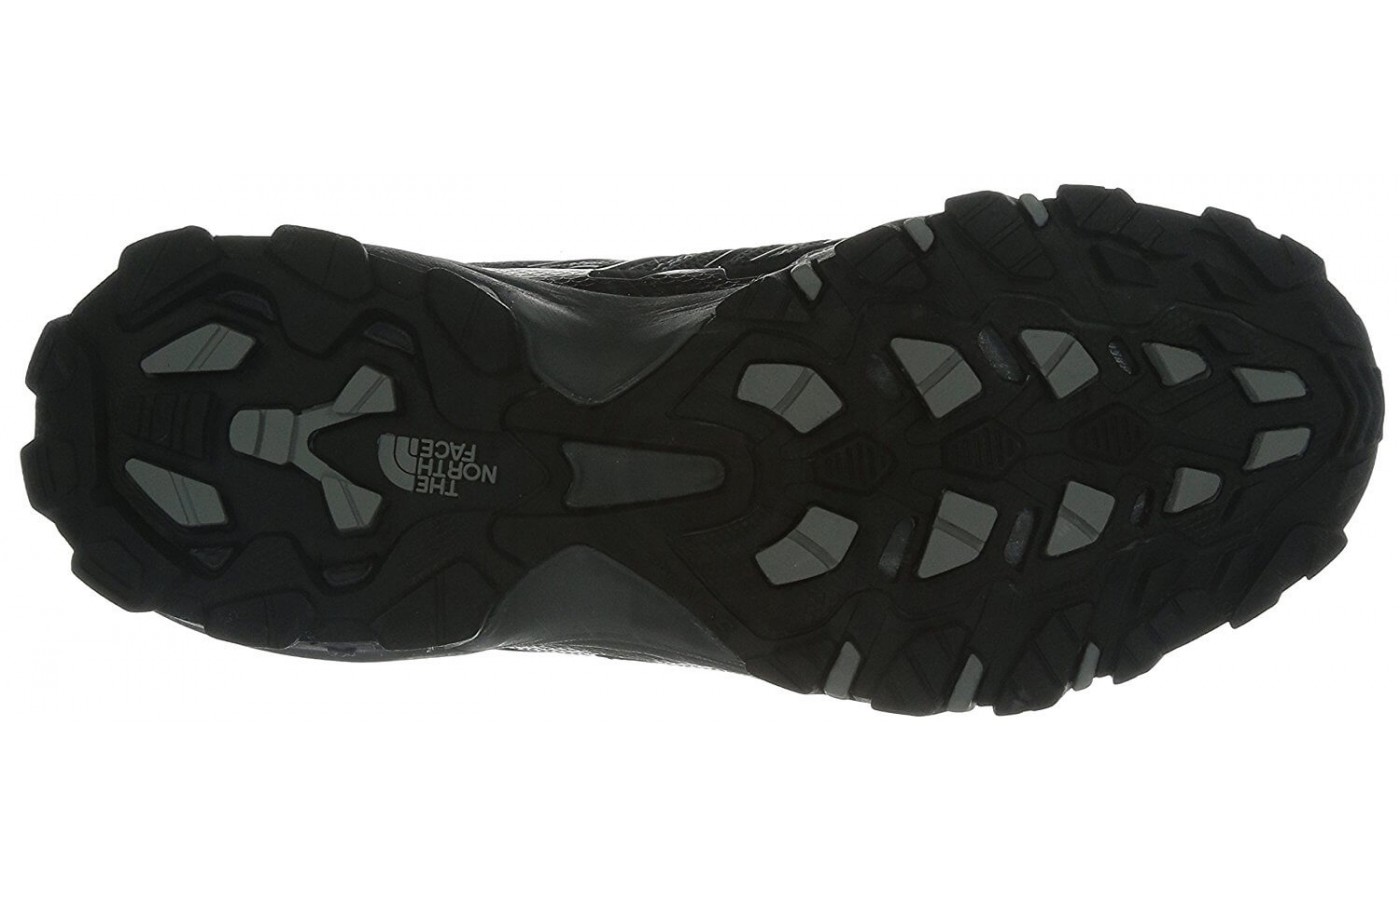 The The North Face Ultra 110 GTX has an UltrATAC outsole